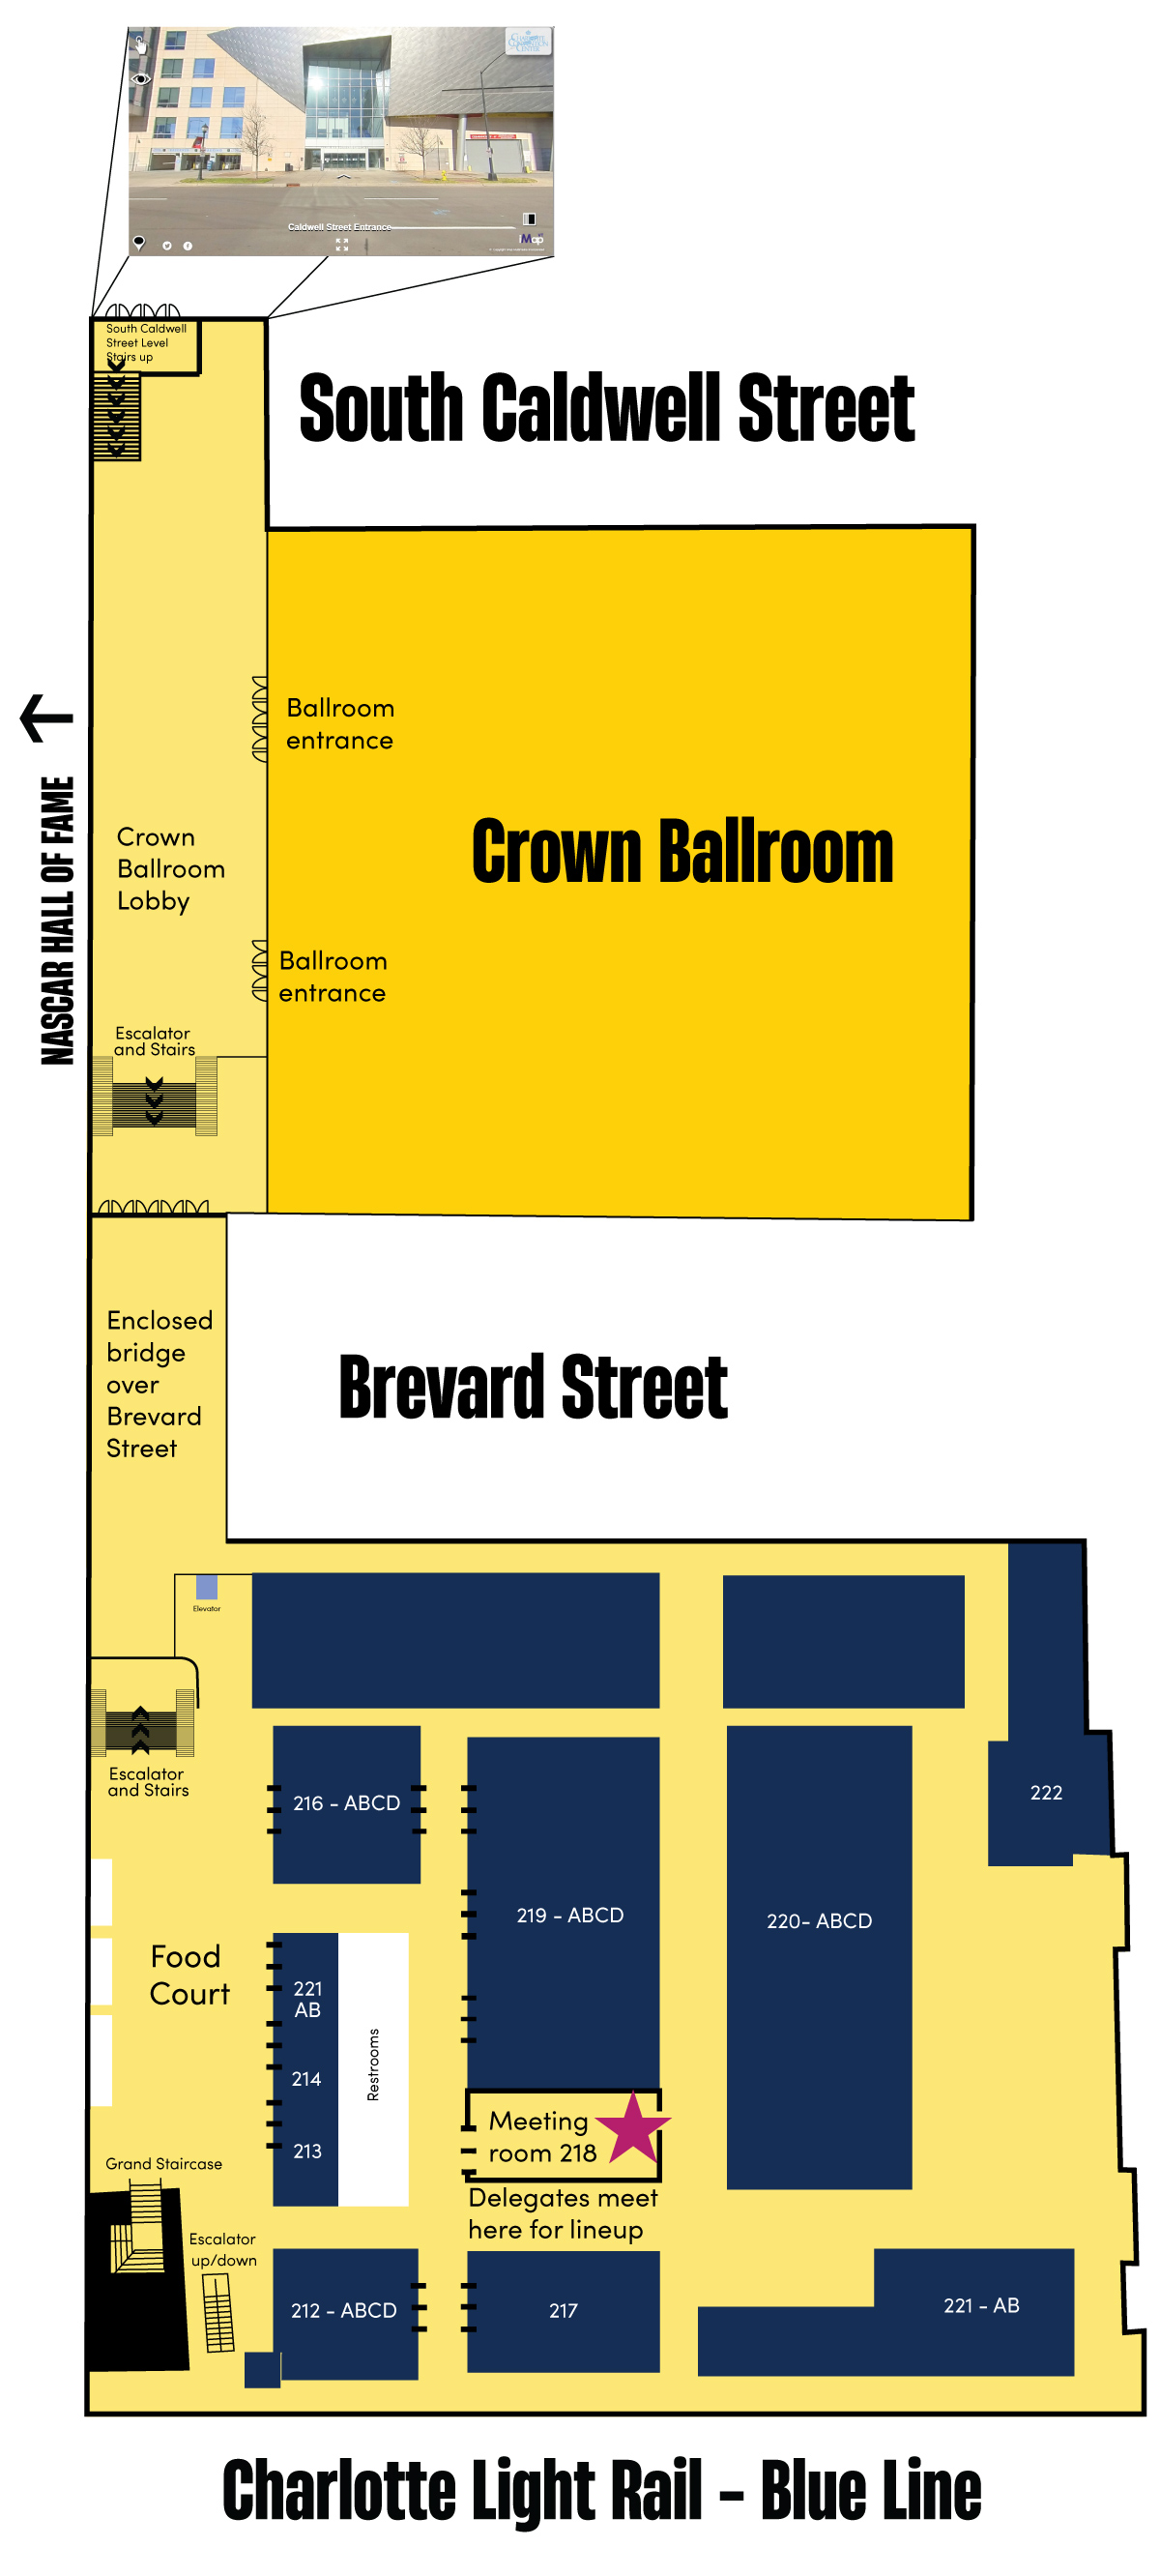 Diagram of the interior of Convention Center of Crown Ballroom in relation to the Meeting room